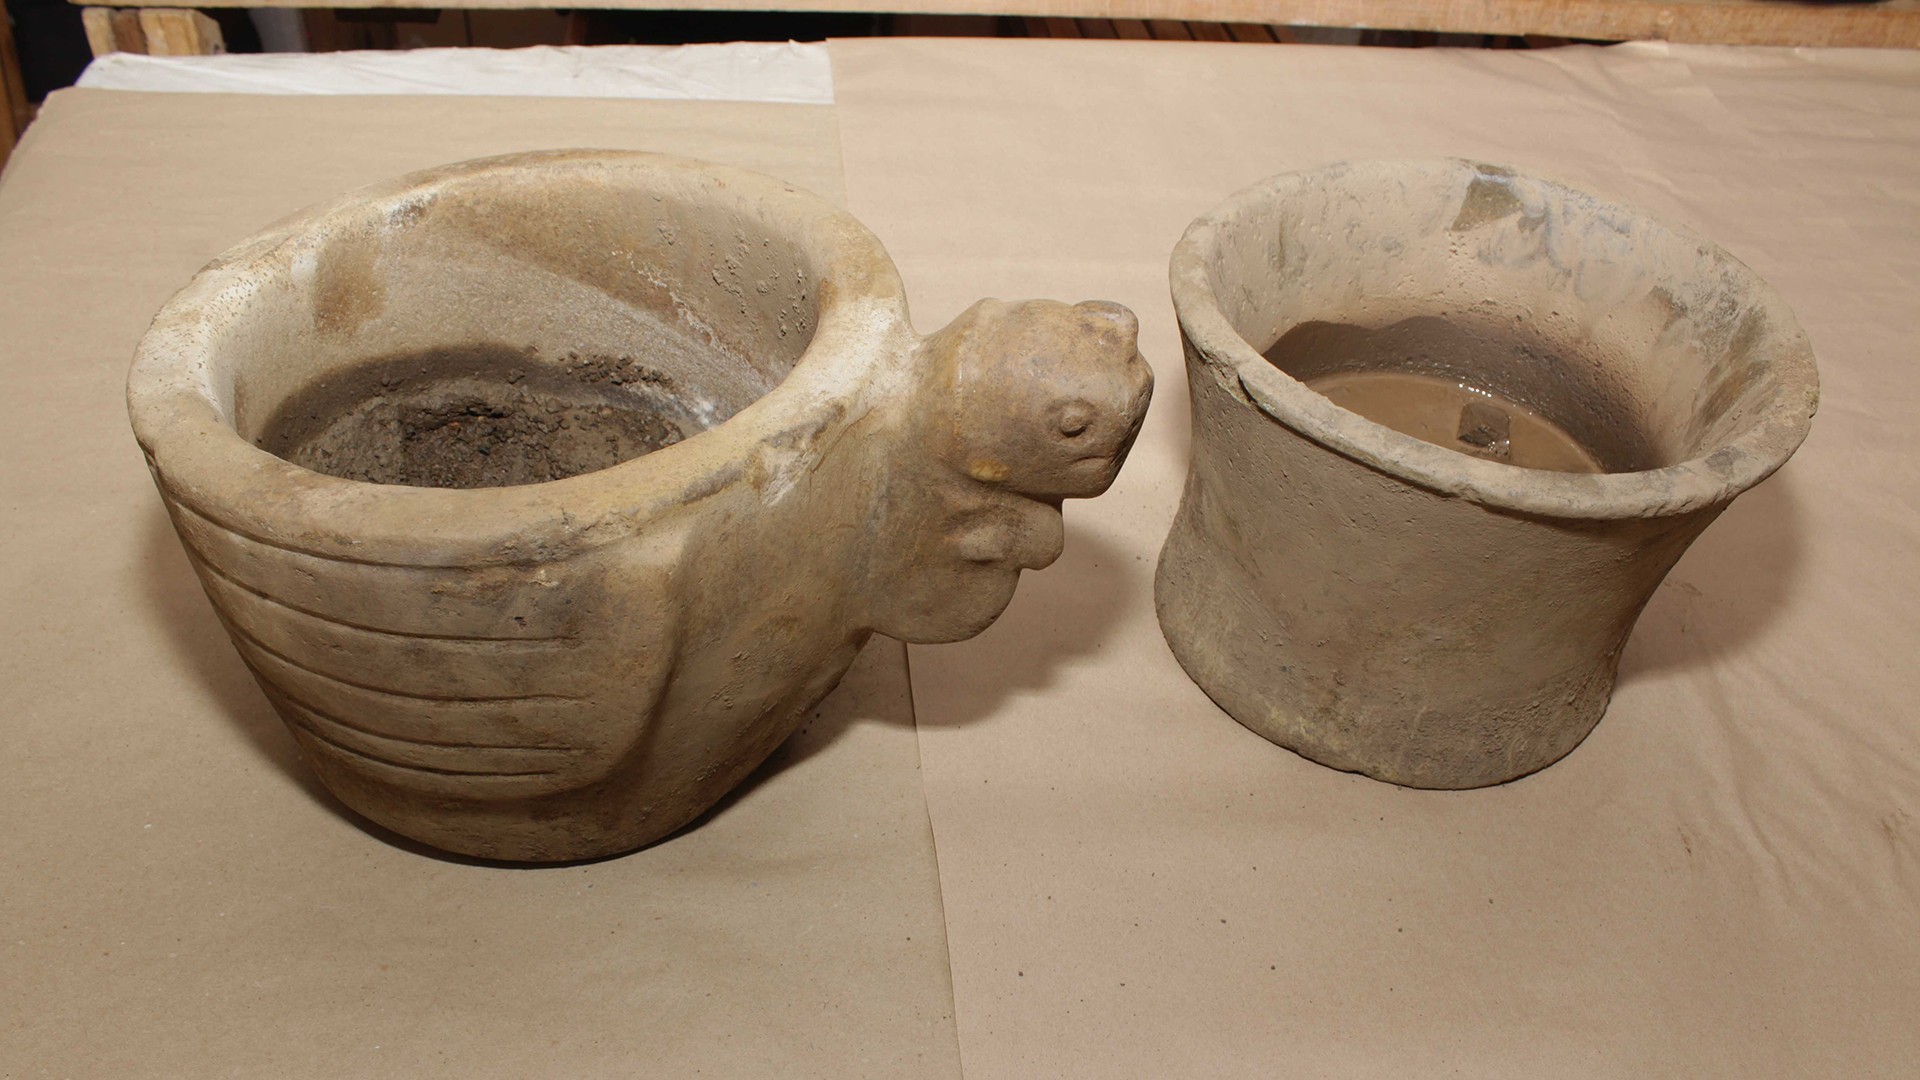 Two stone bowls, one decorated with the head and wings of an Andean condor, were discovered in a gallery of the hidden temple complex of Chavín de Huántar.